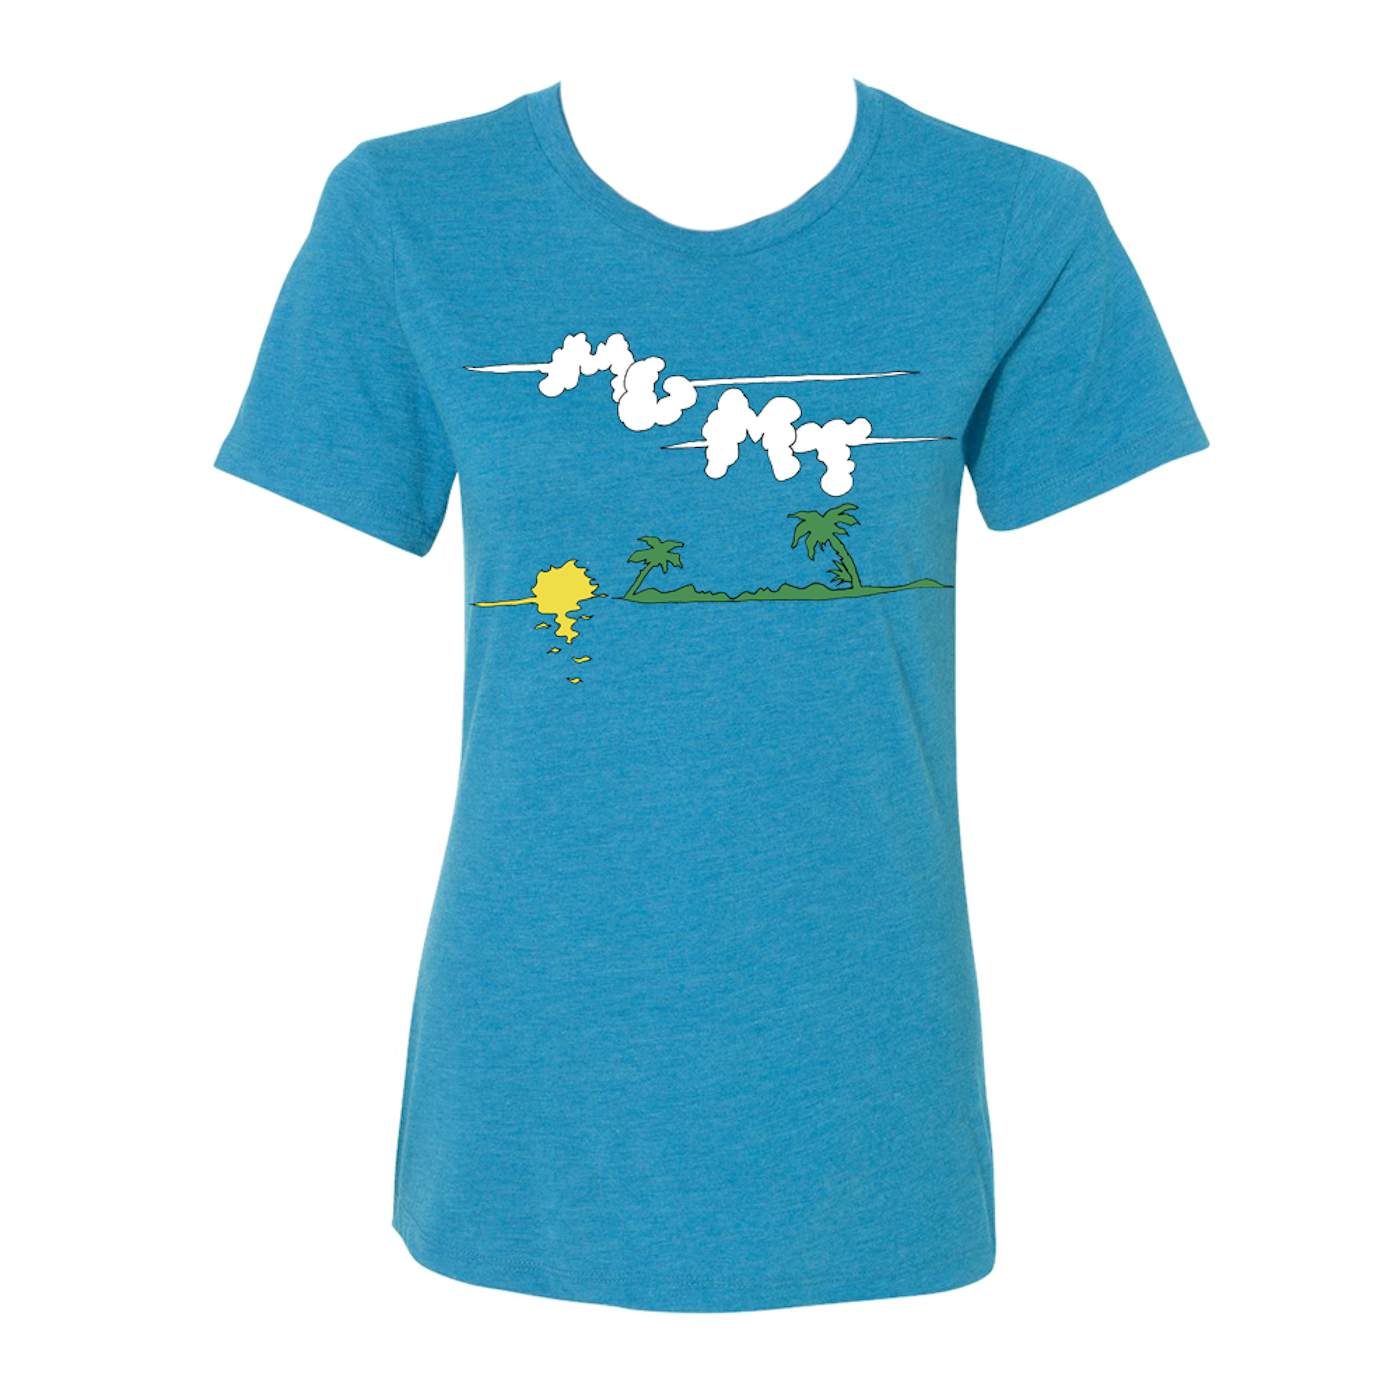 MGMT Girl's Clouds T-shirt